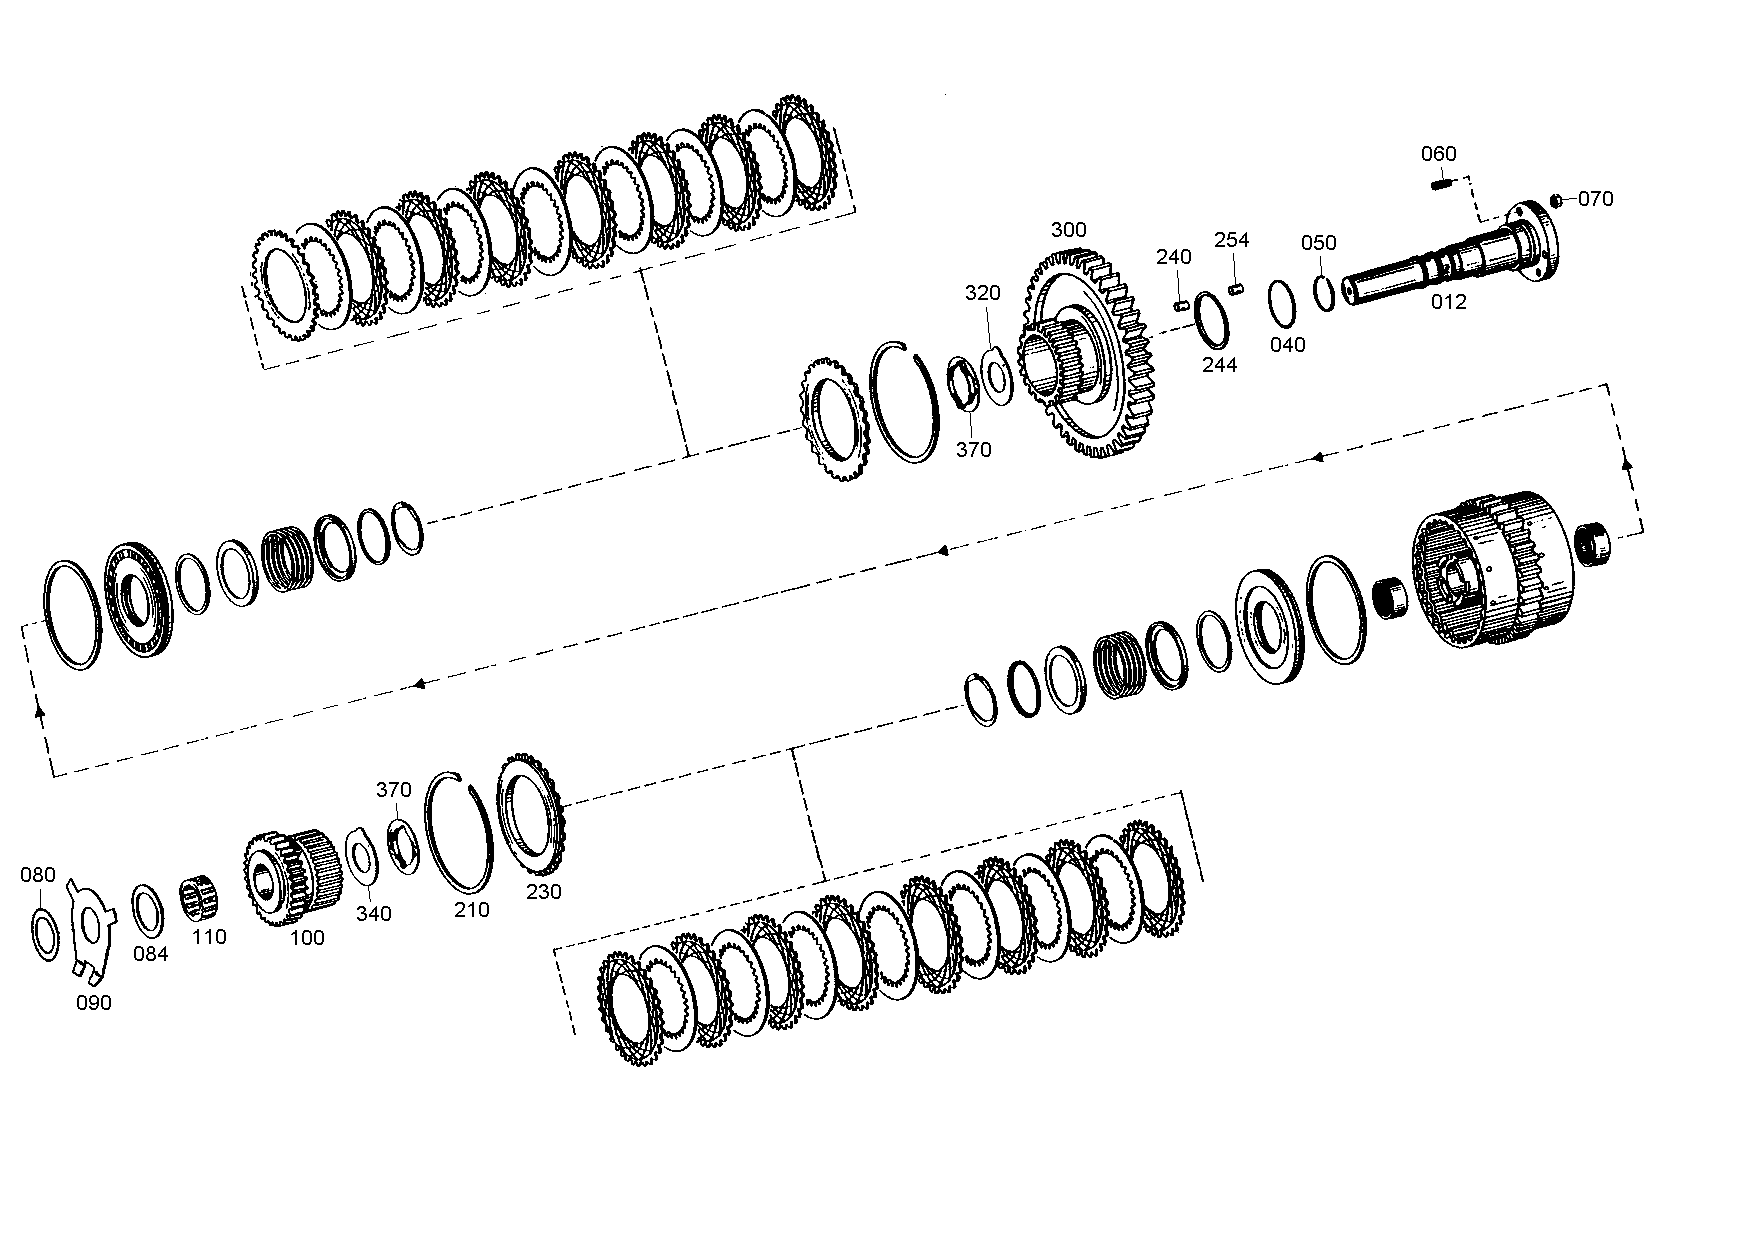 drawing for NACCO-IRV 1390926 - NEEDLE CAGE (figure 4)